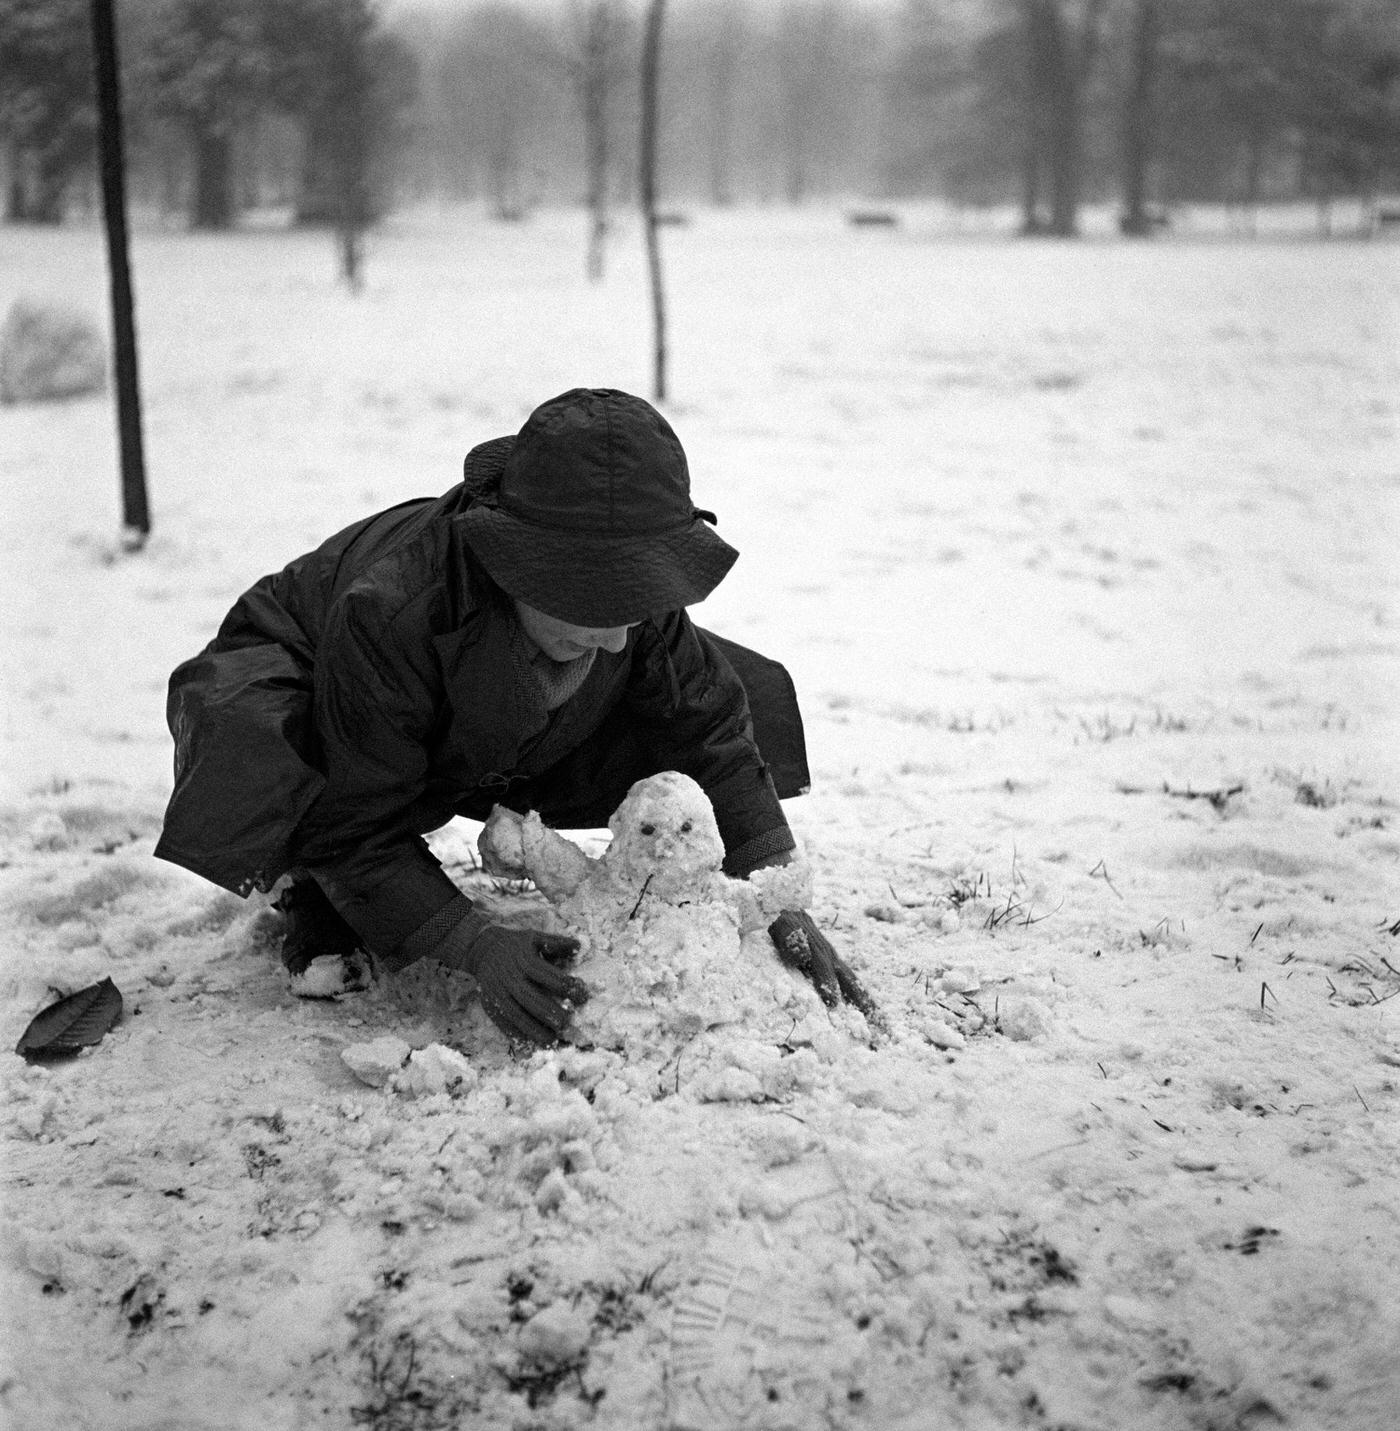 Little boy crouching and making a snowman in a park after a snowfall. Milan, 1950s.